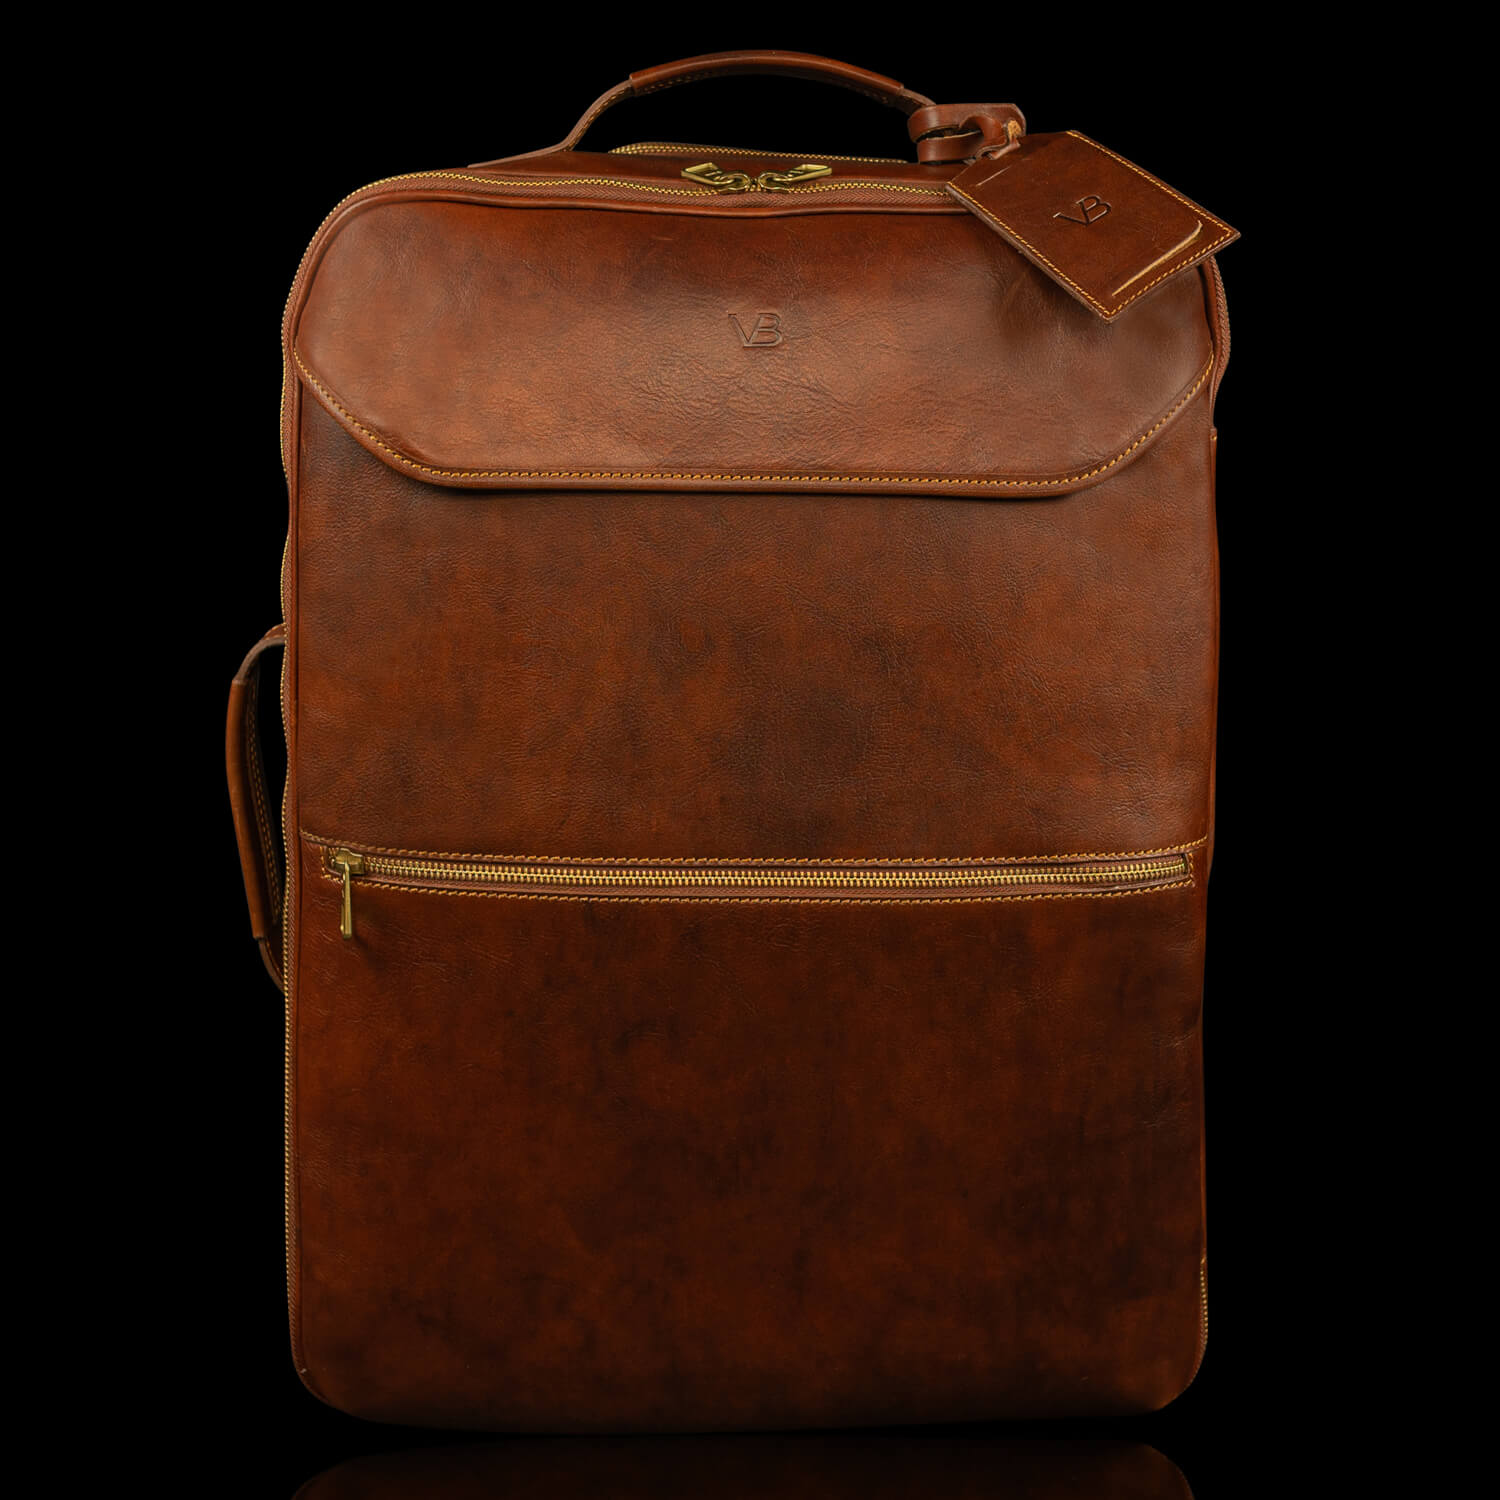 voyager leather carry on bag